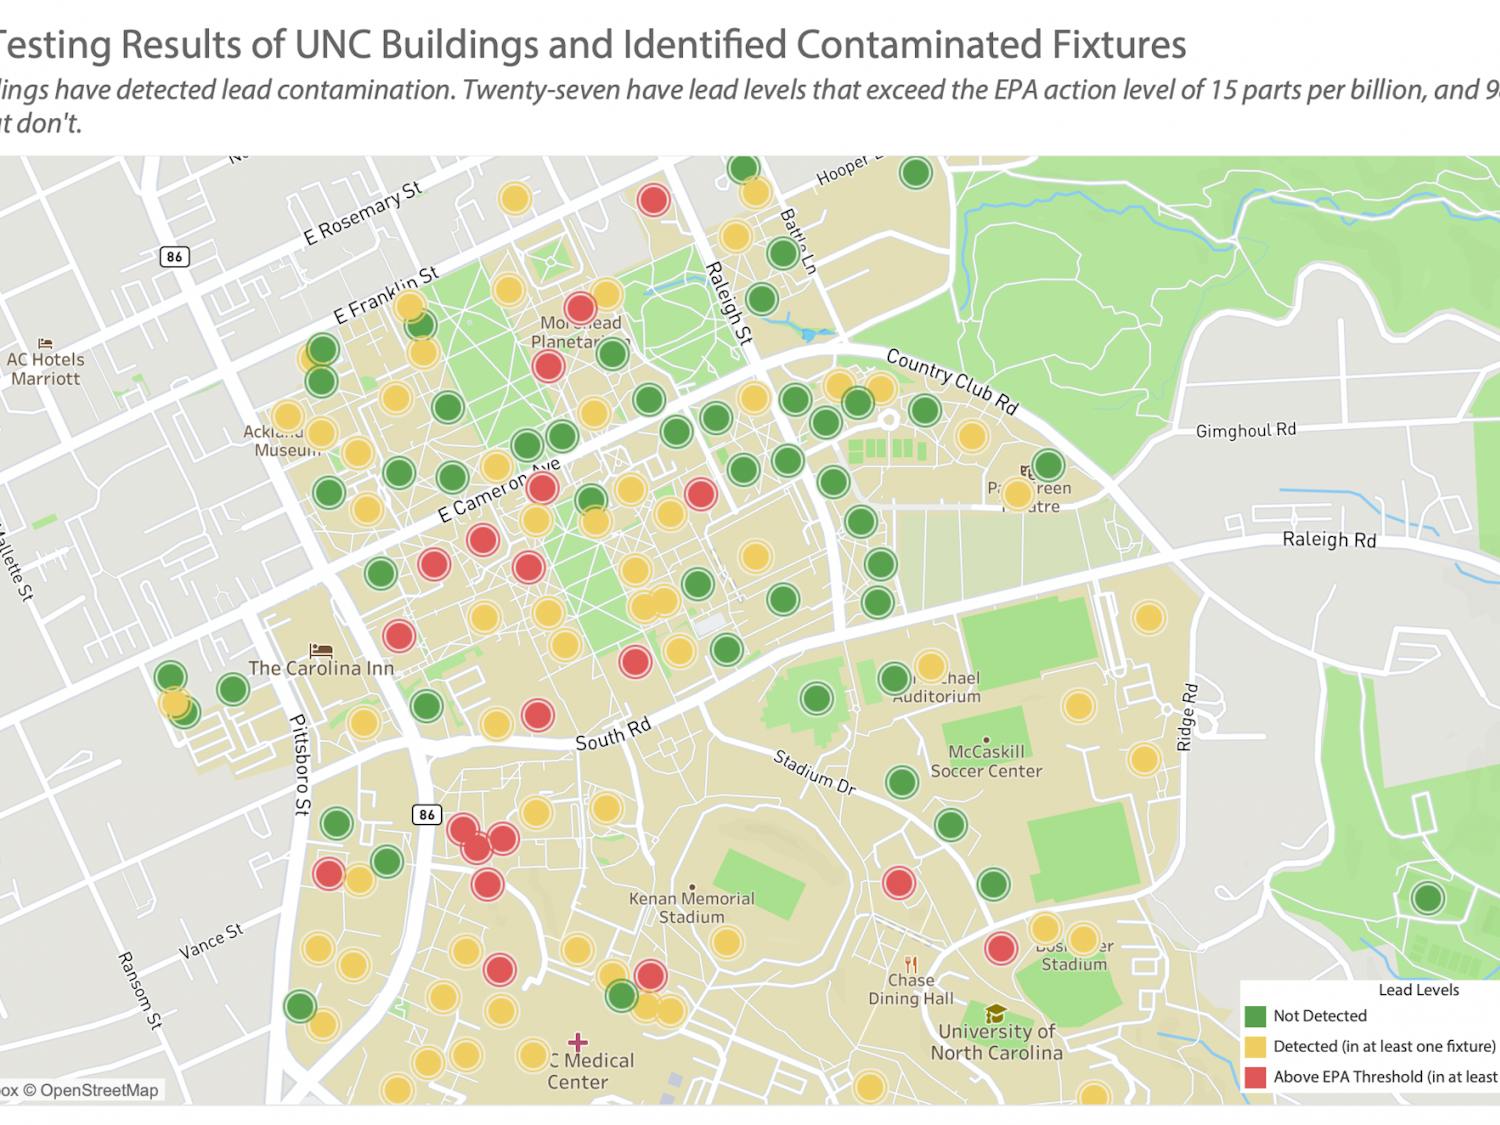 Lead Testing Results of UNC Buildings and Identified Contaminated Fixtures as of January 2023